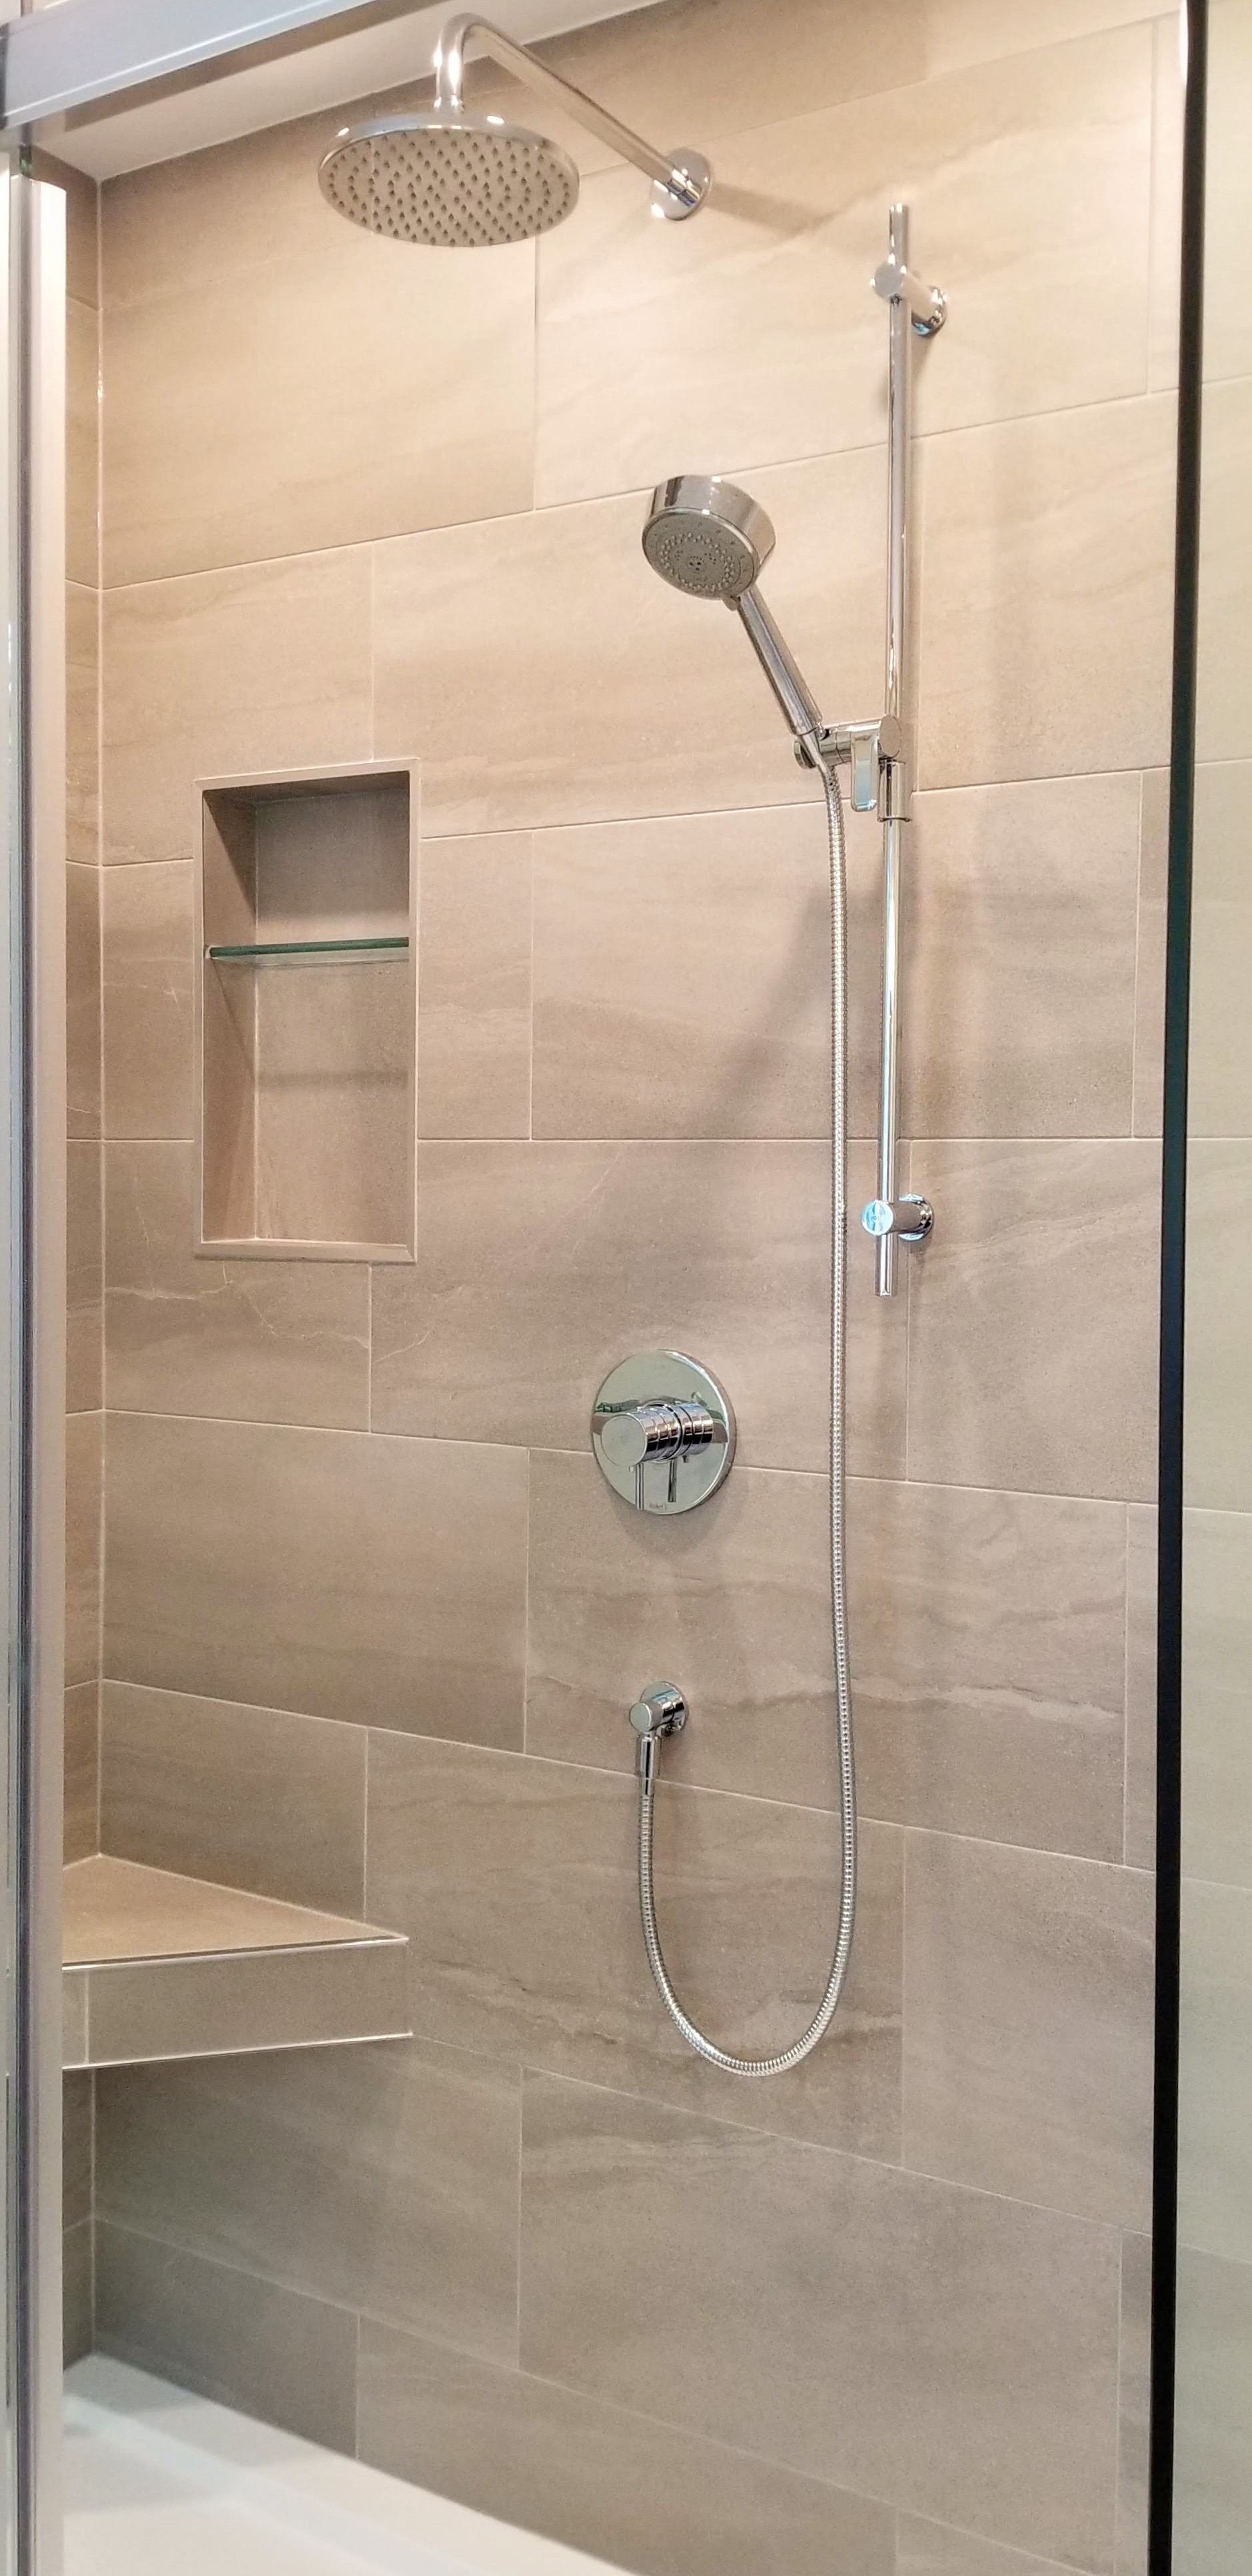 Tiled shower with niche installed in ensuite bathroom by Germano Creative Interior Contracting Ltd.